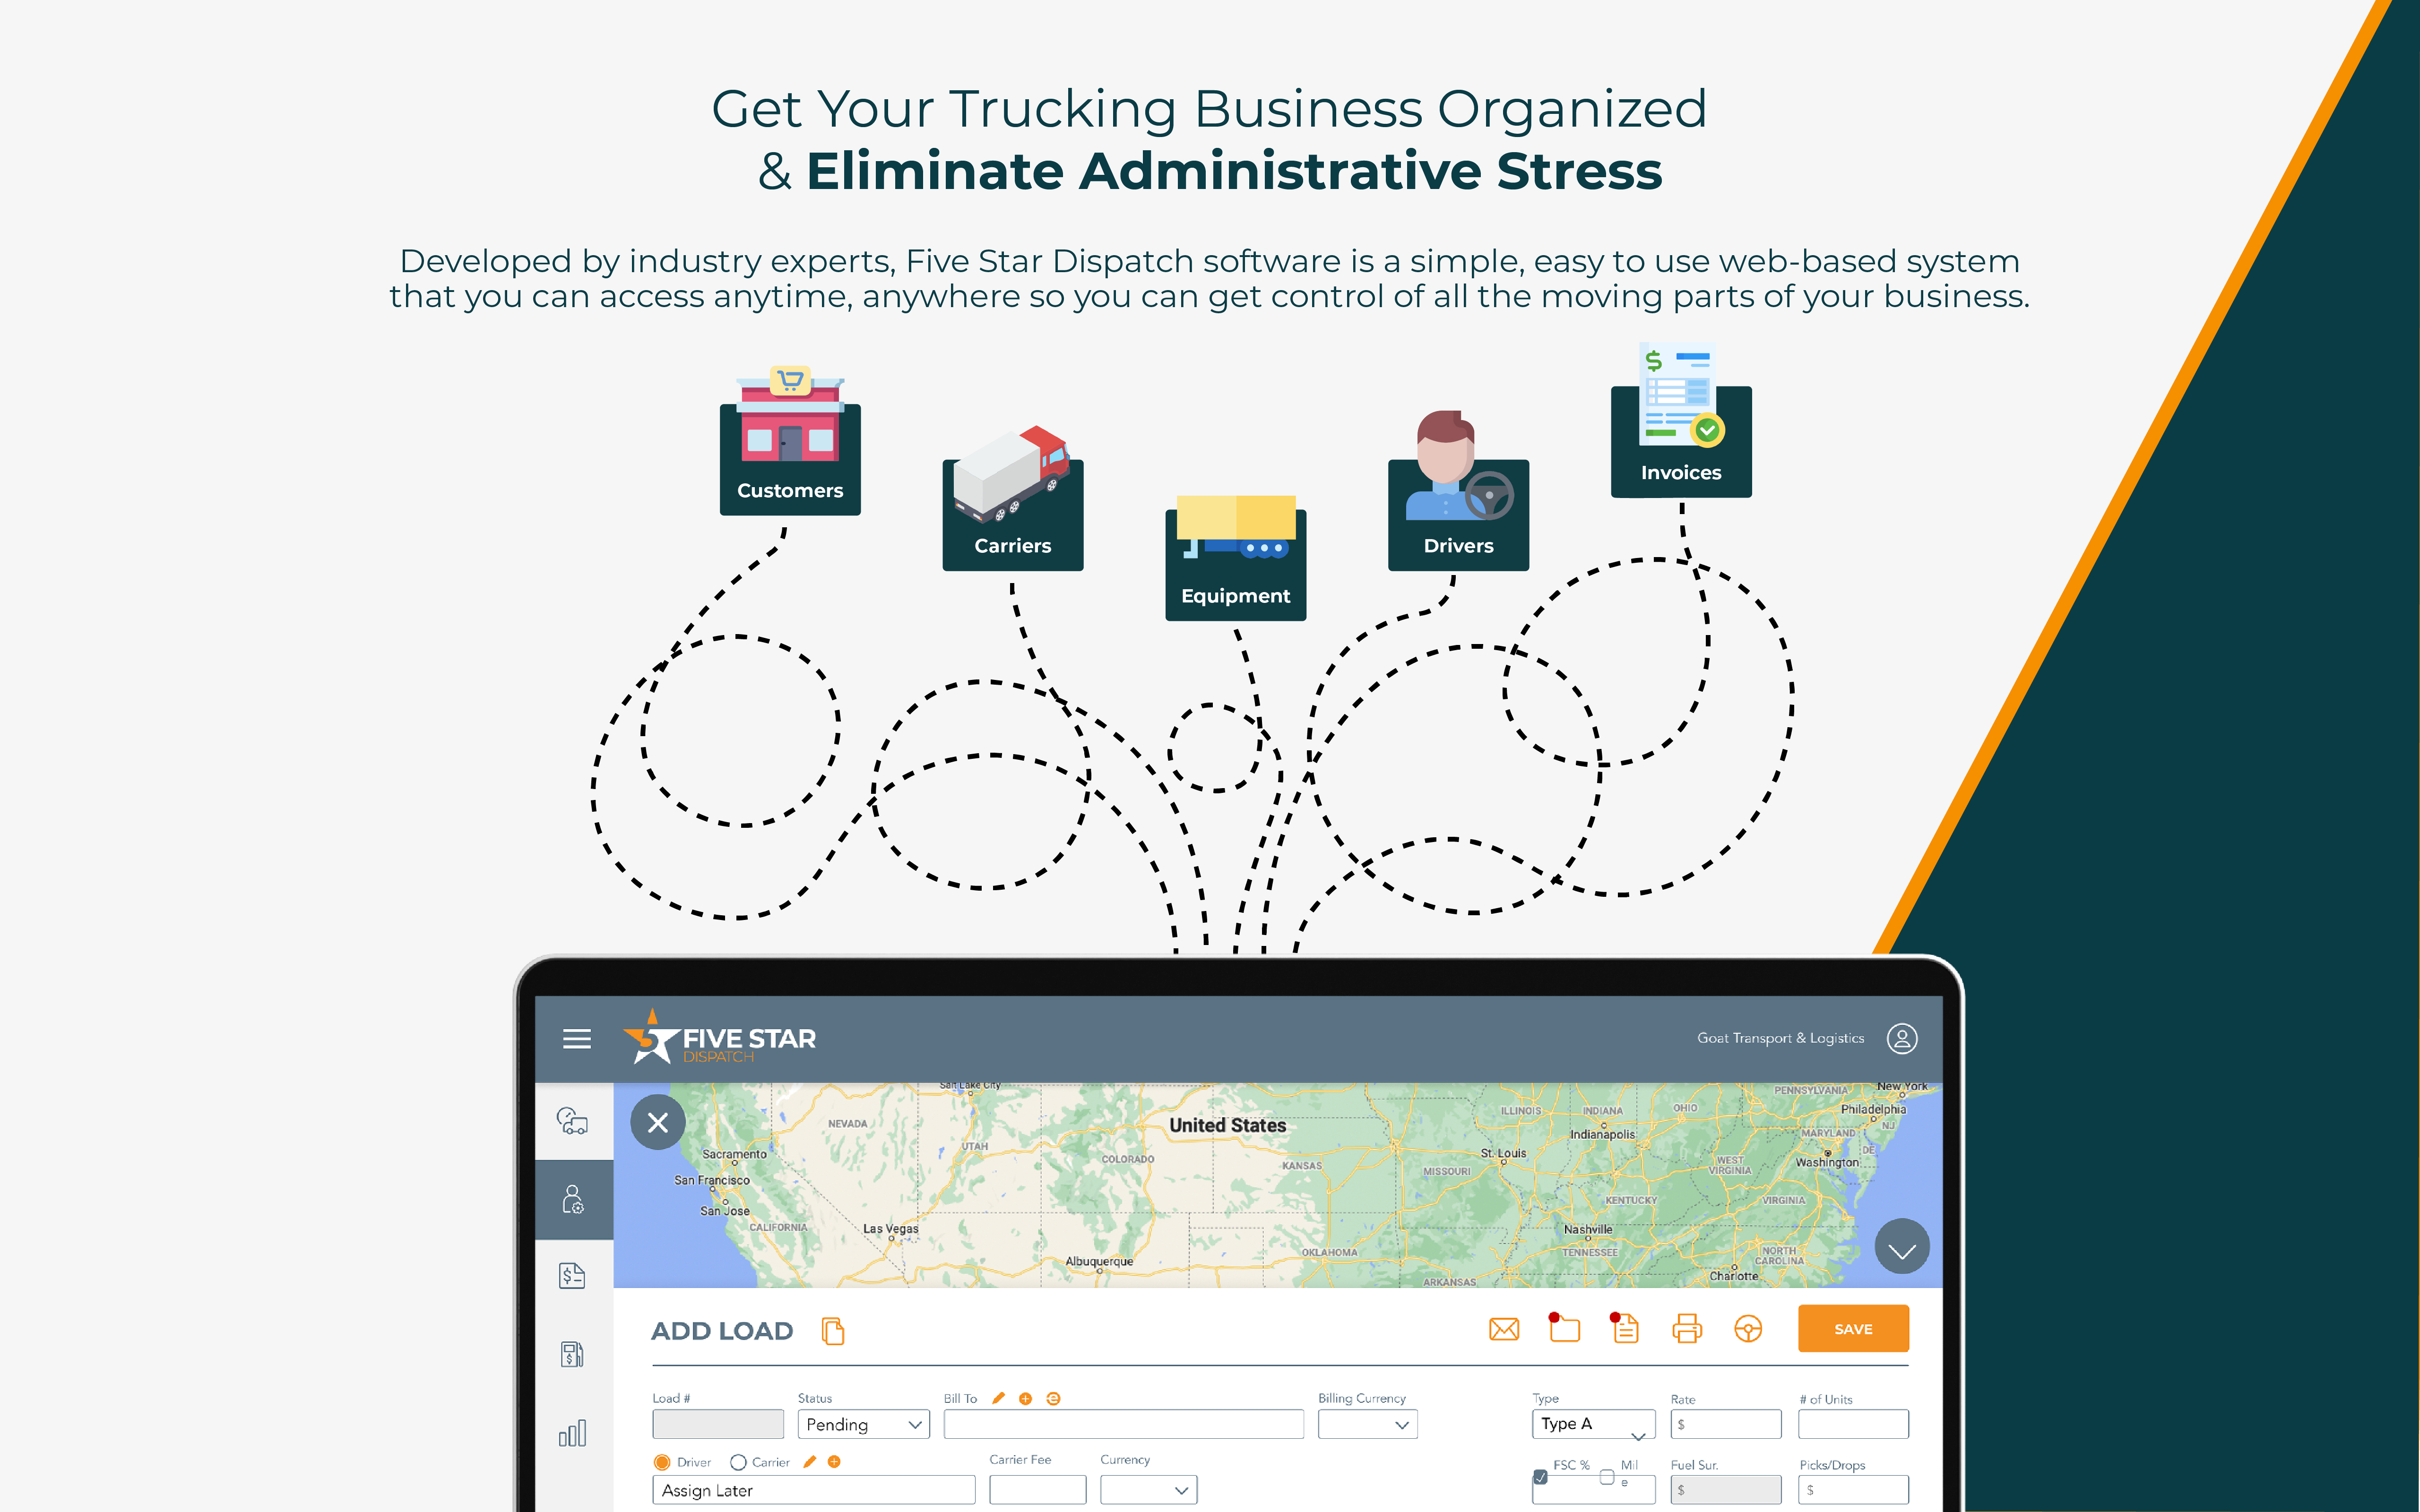 Get Your Trucking Business Organized & Eliminate Administrative Stress